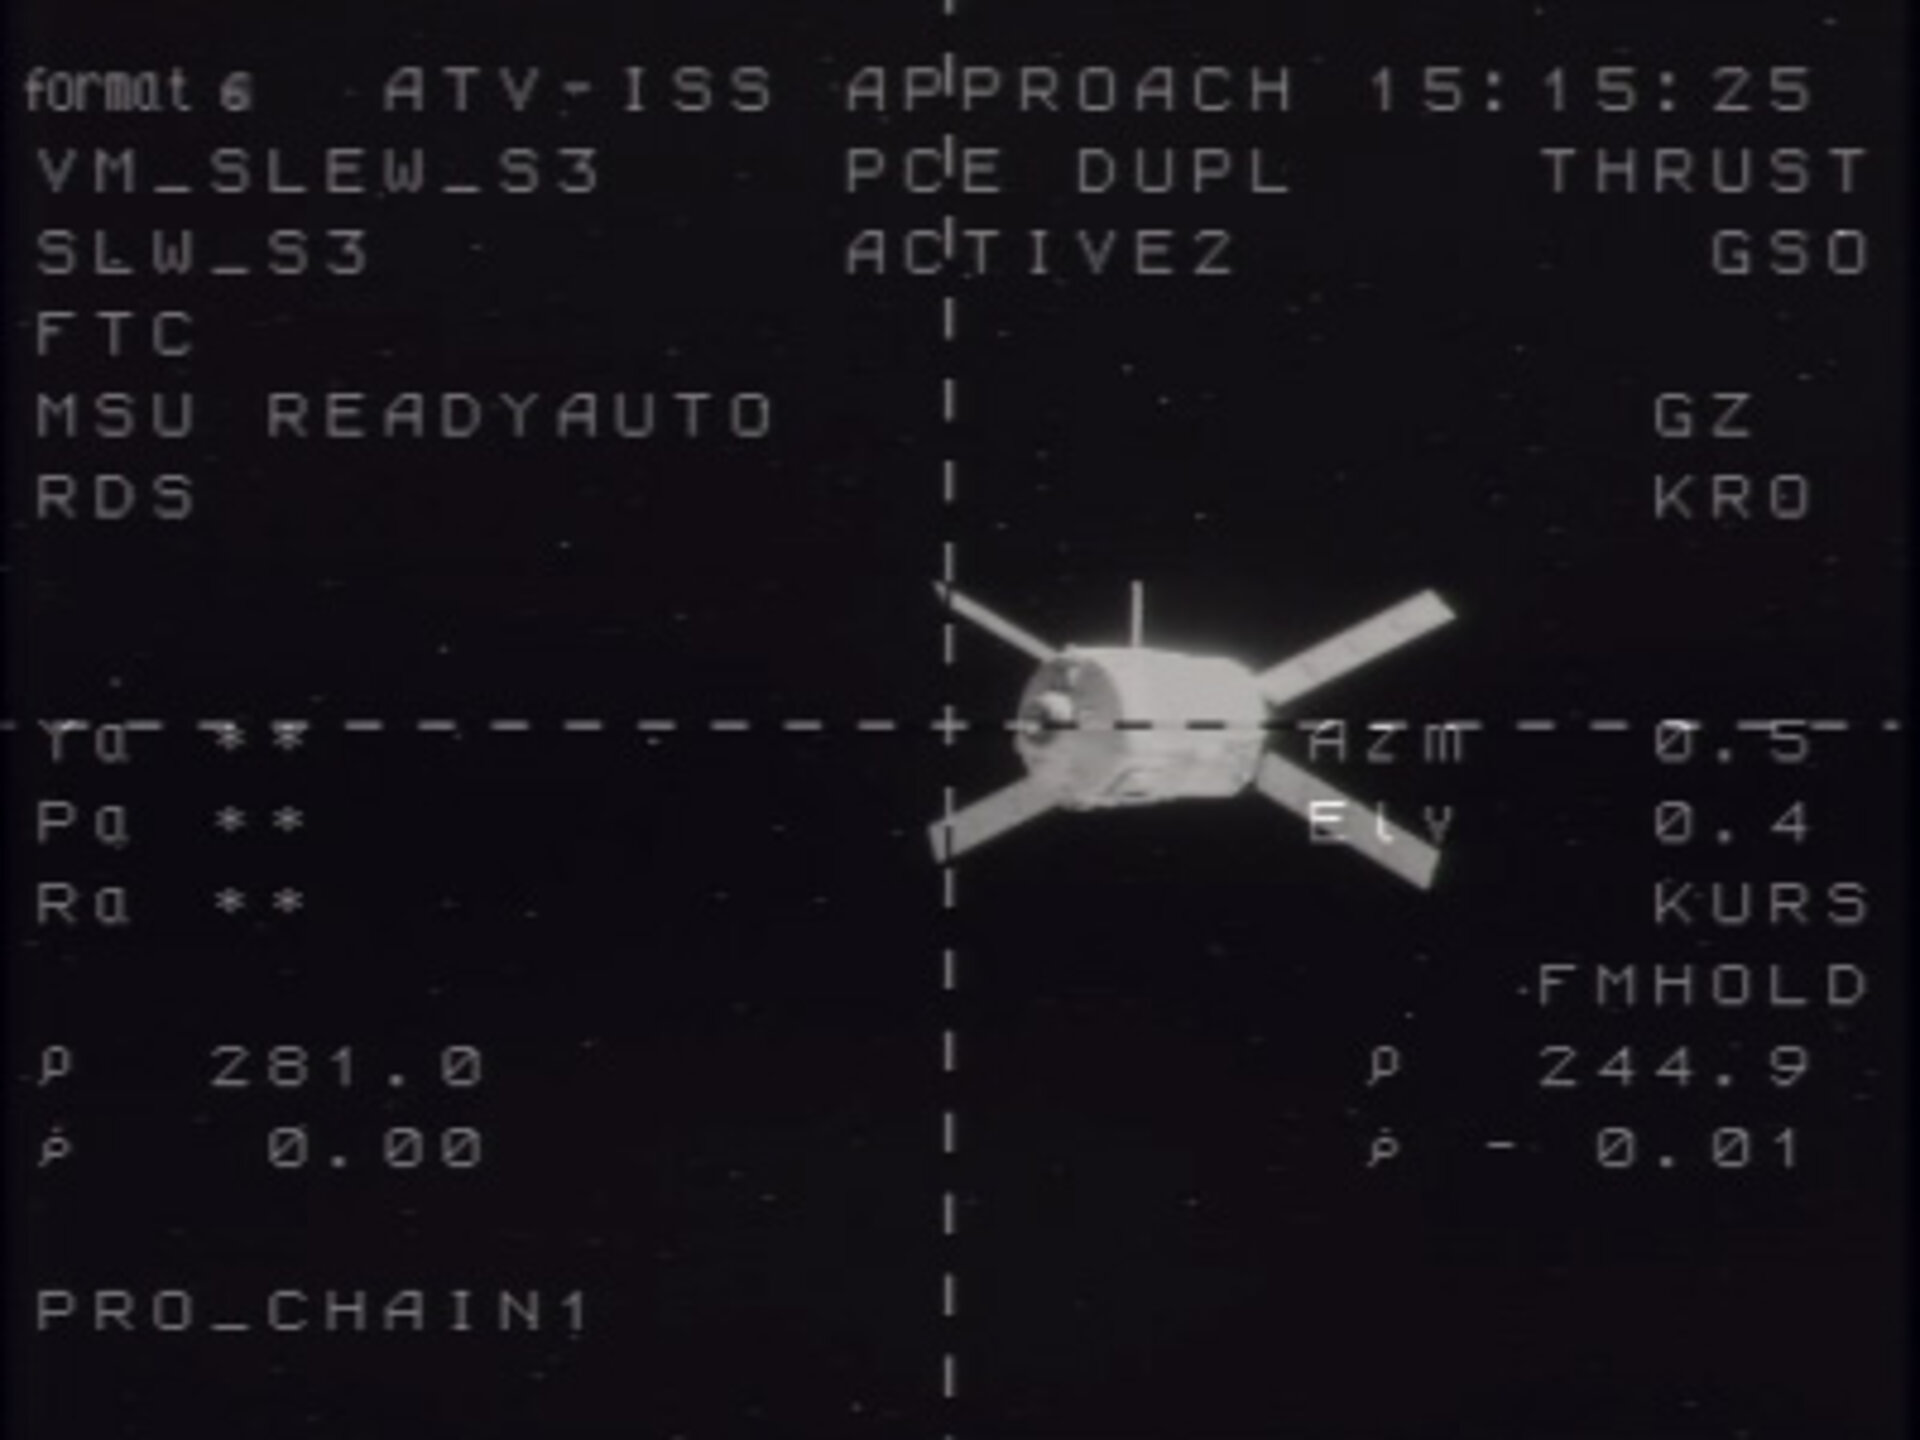 Jules Verne ATV approaches the ISS during the second of two demonstration days prior to docking